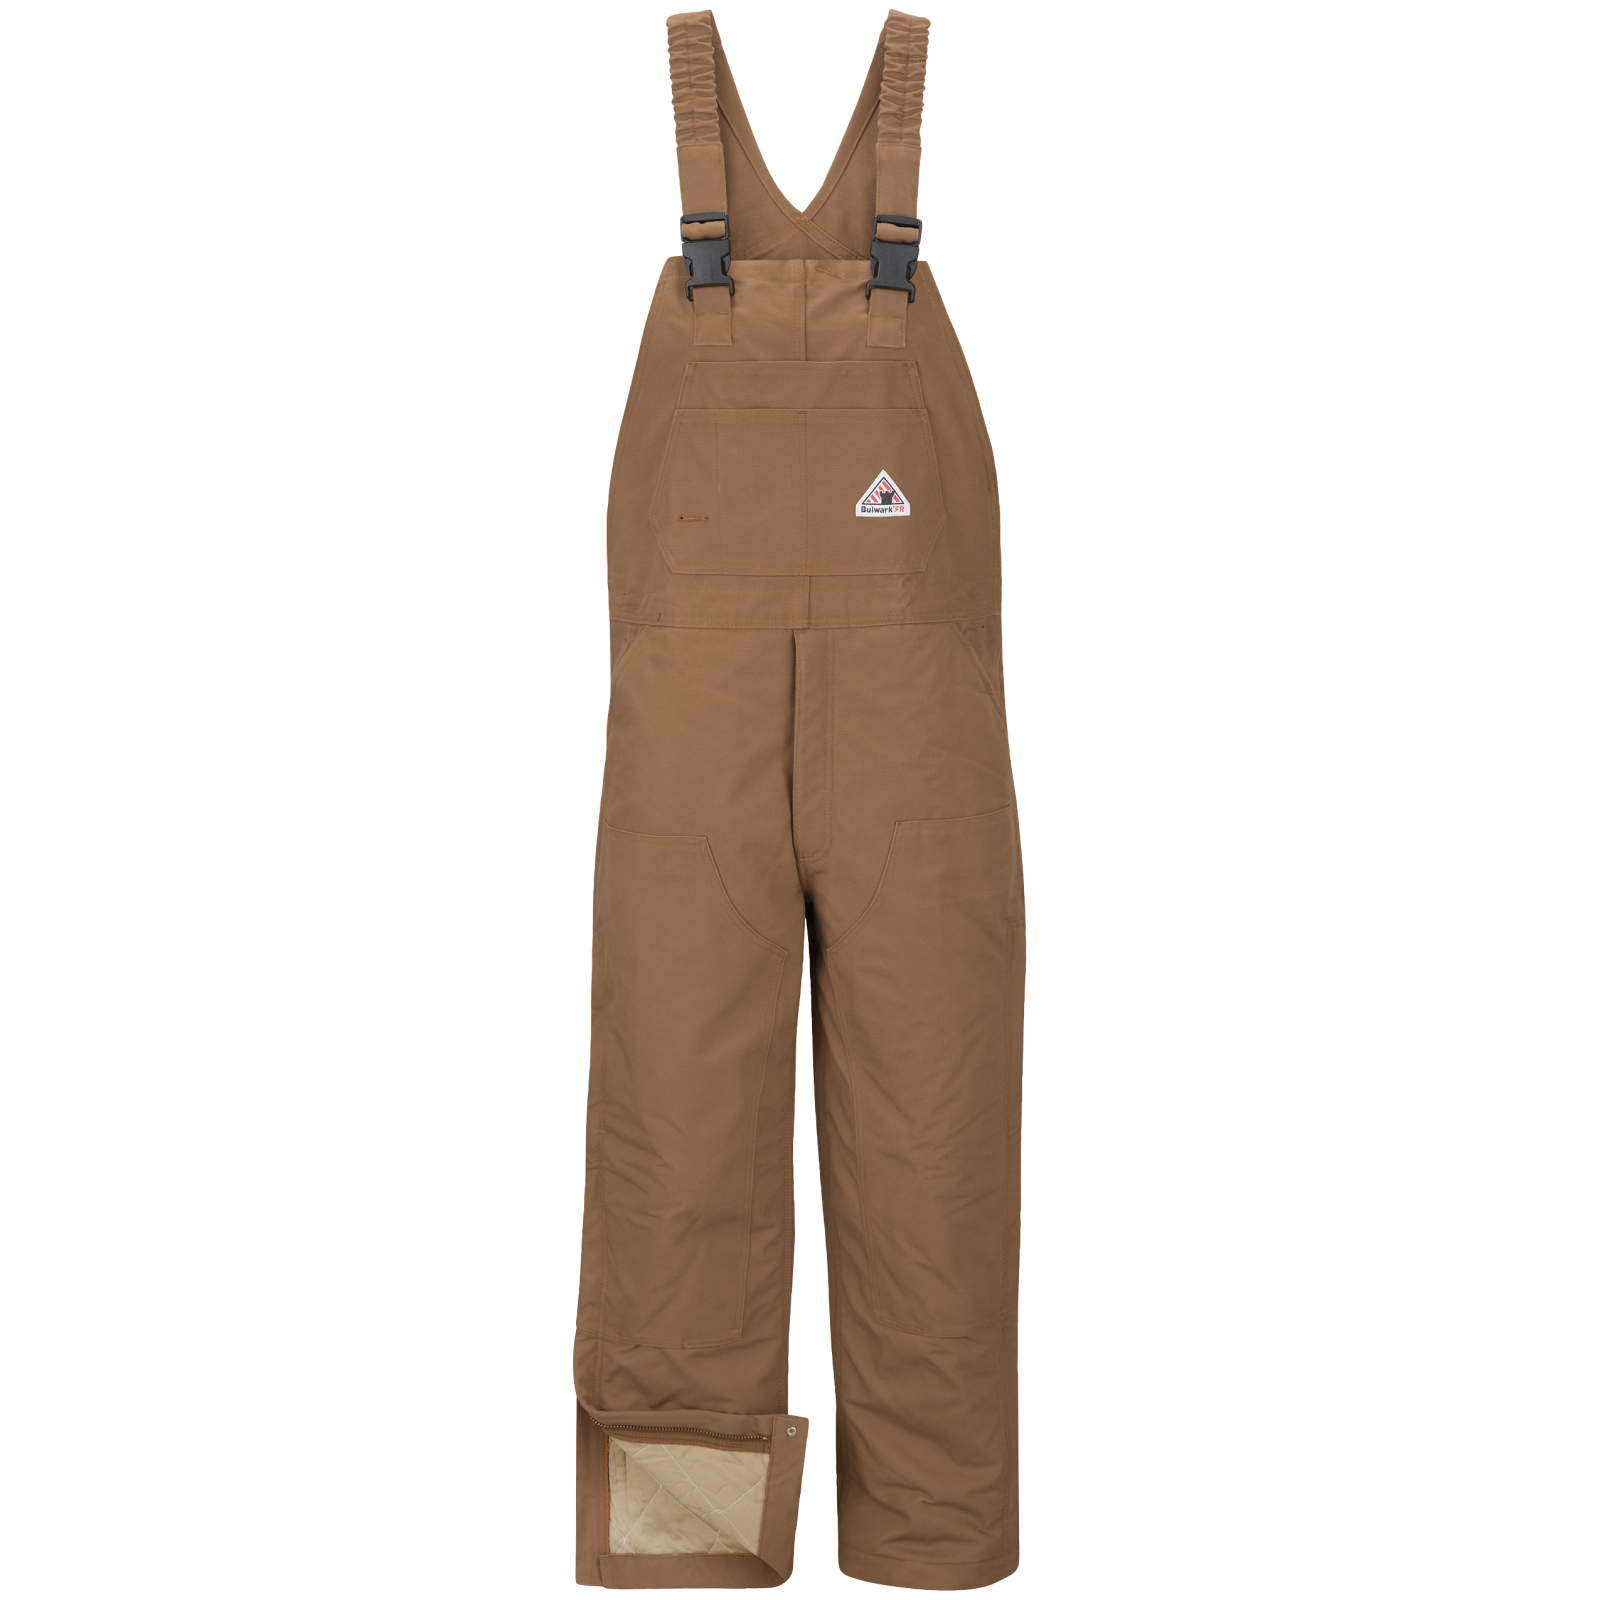 Men's Heavyweight FR Insulated Brown Duck Bib Overall with Knee